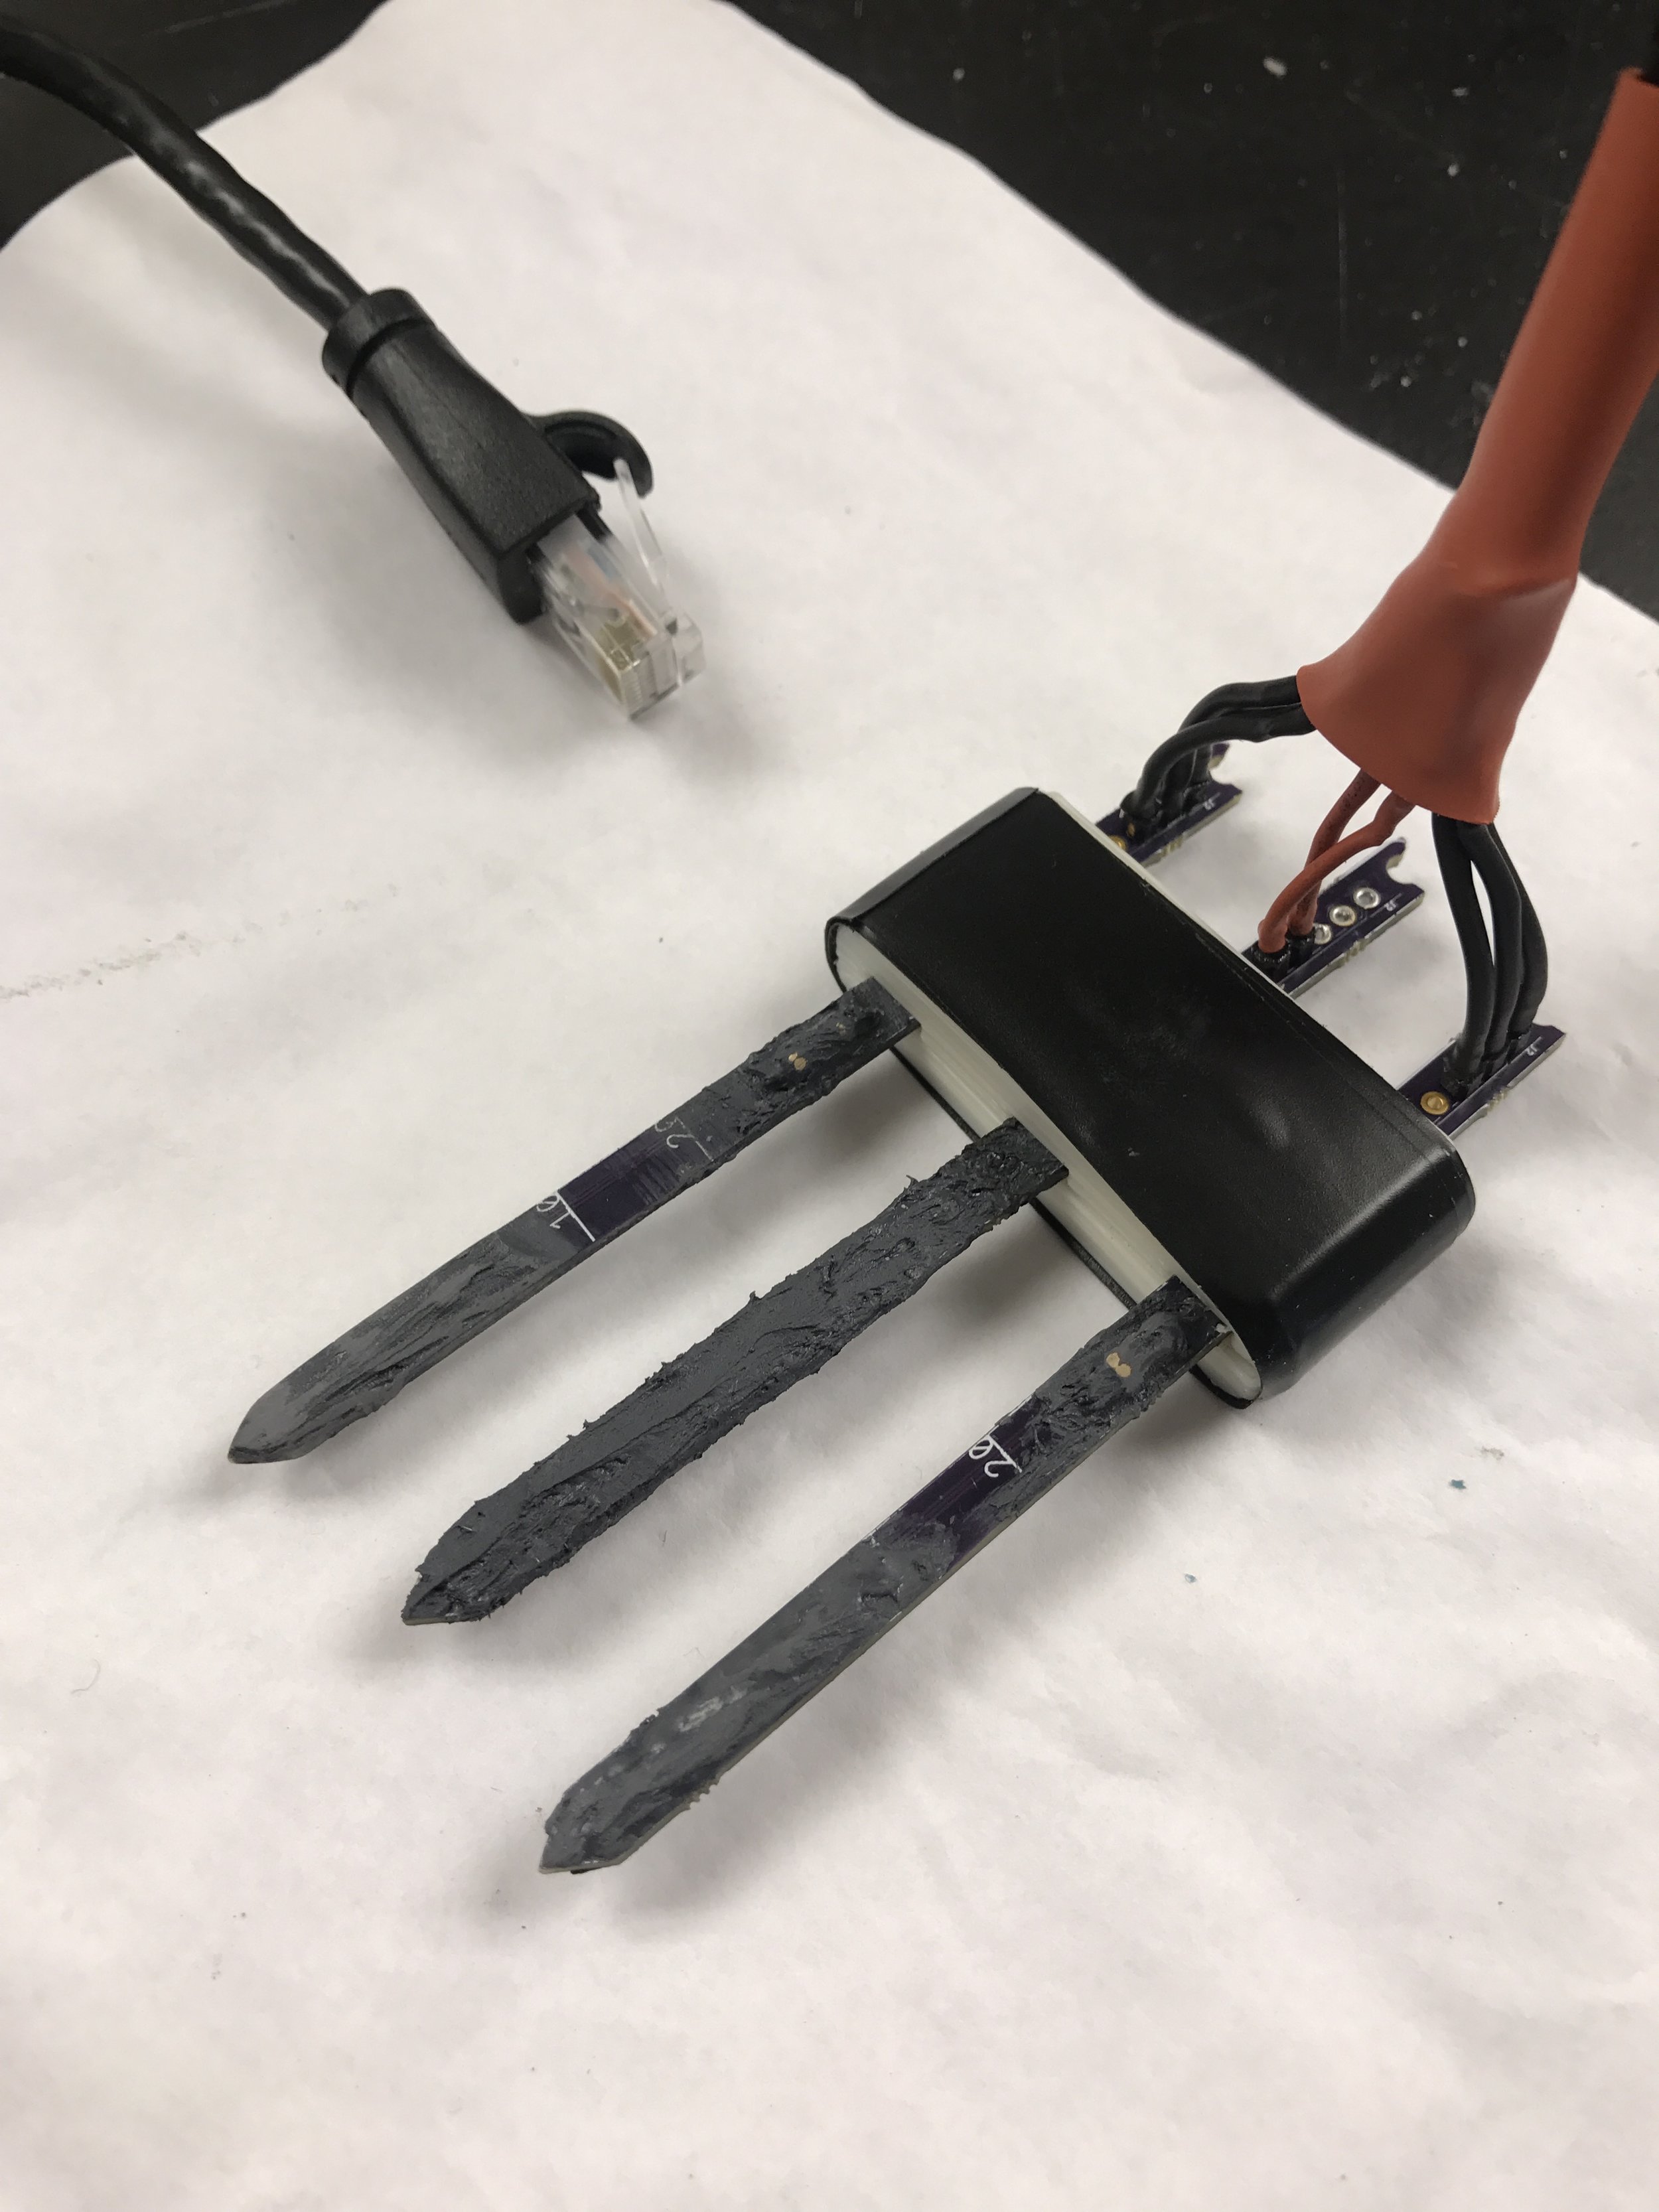 The two outside probes (thermistor probes) have been sanded. As you can see, there is a smoother texture than the middle probe (HRM coil heater probe), which has not yet been sanded.